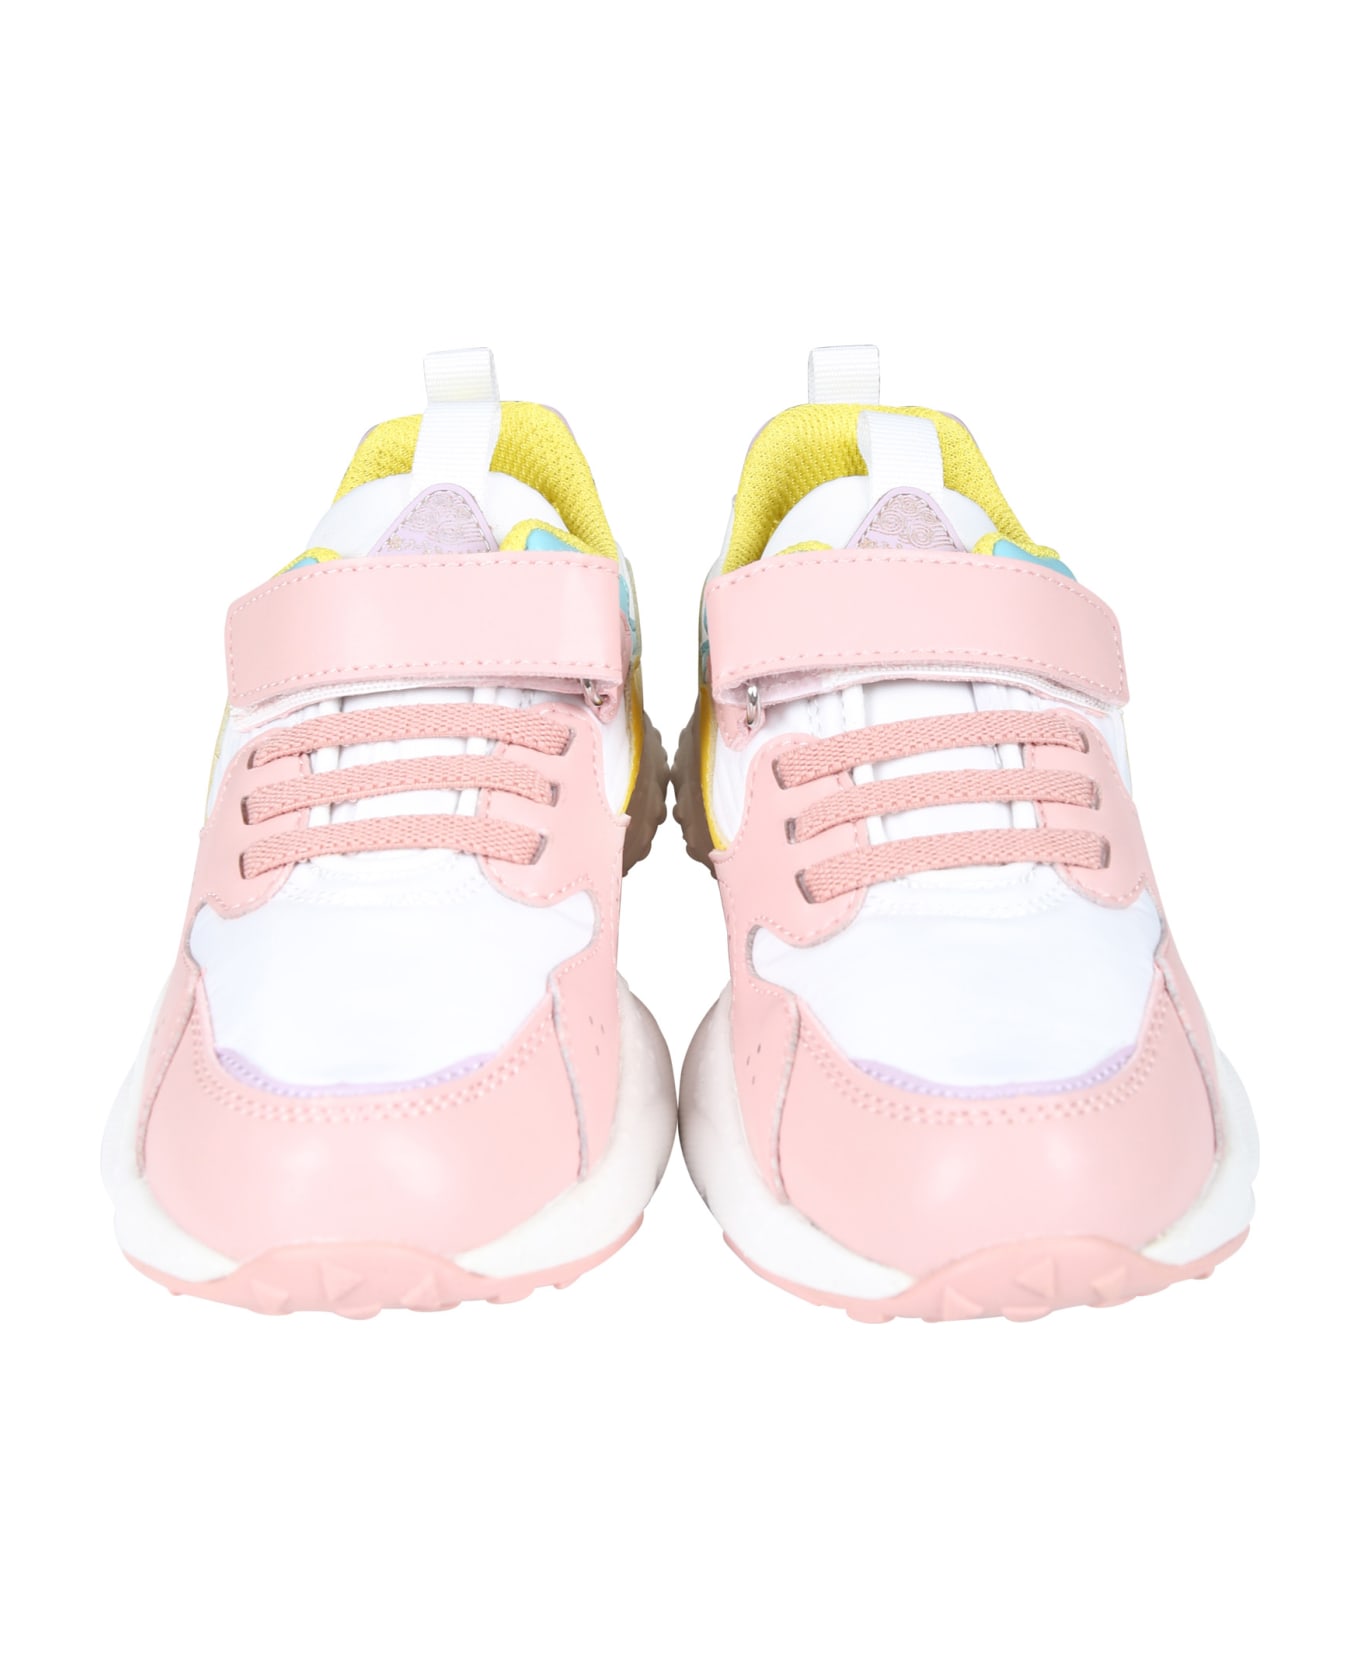 Flower Mountain Pink Yamano Low Sneakers For Girl - Pink シューズ